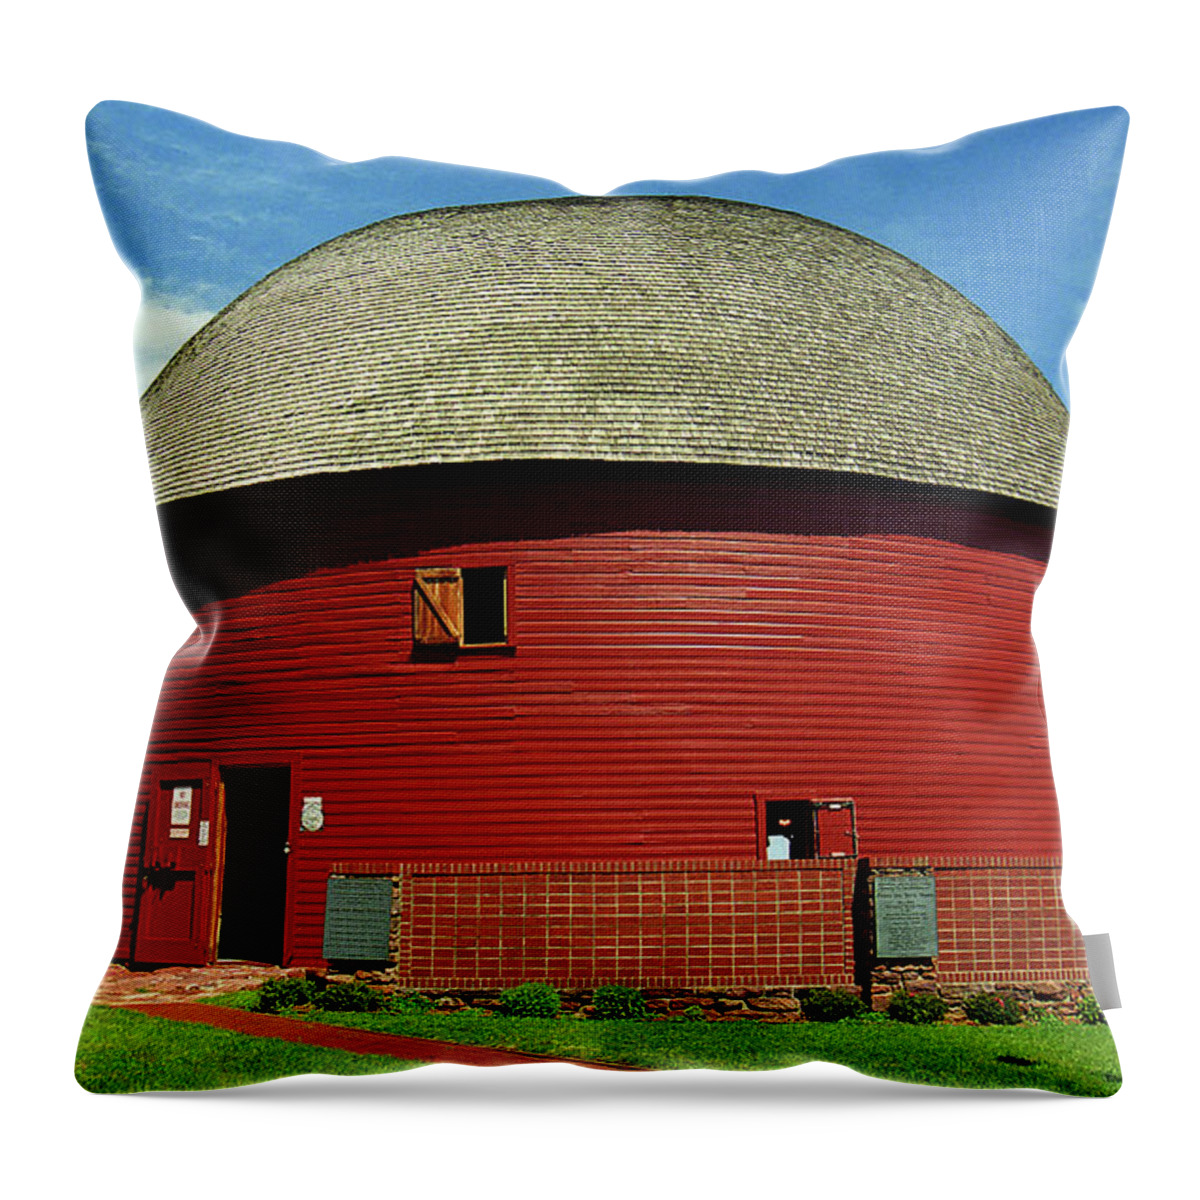 66 Throw Pillow featuring the photograph Route 66 - Round Barn 2007 by Frank Romeo